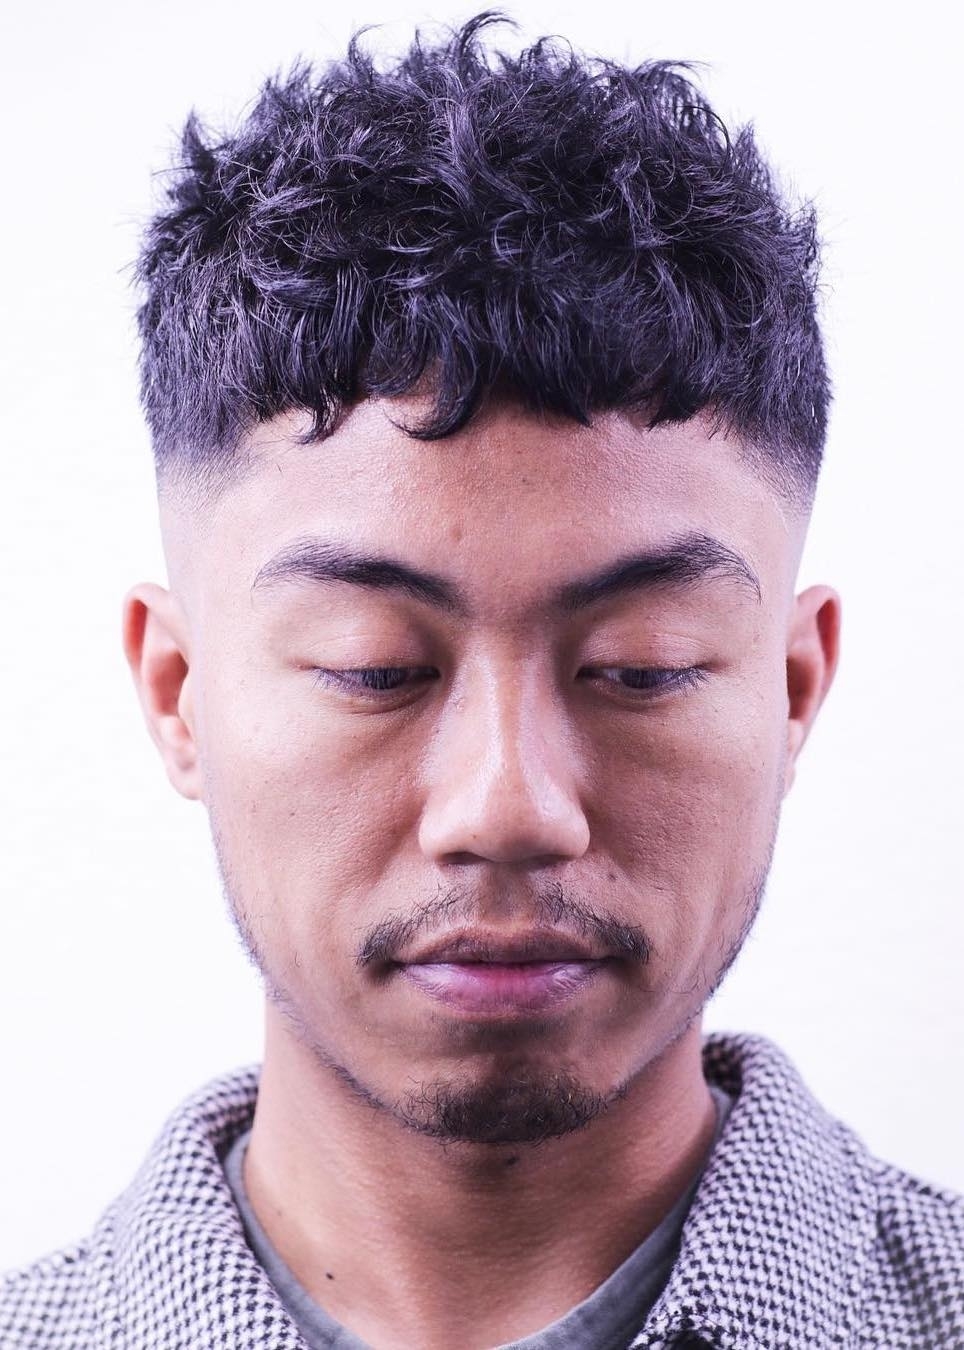 Top 30 Trendy Asian Men Hairstyles 2019 pertaining to Asian Male Hairstyles For Thin Hair